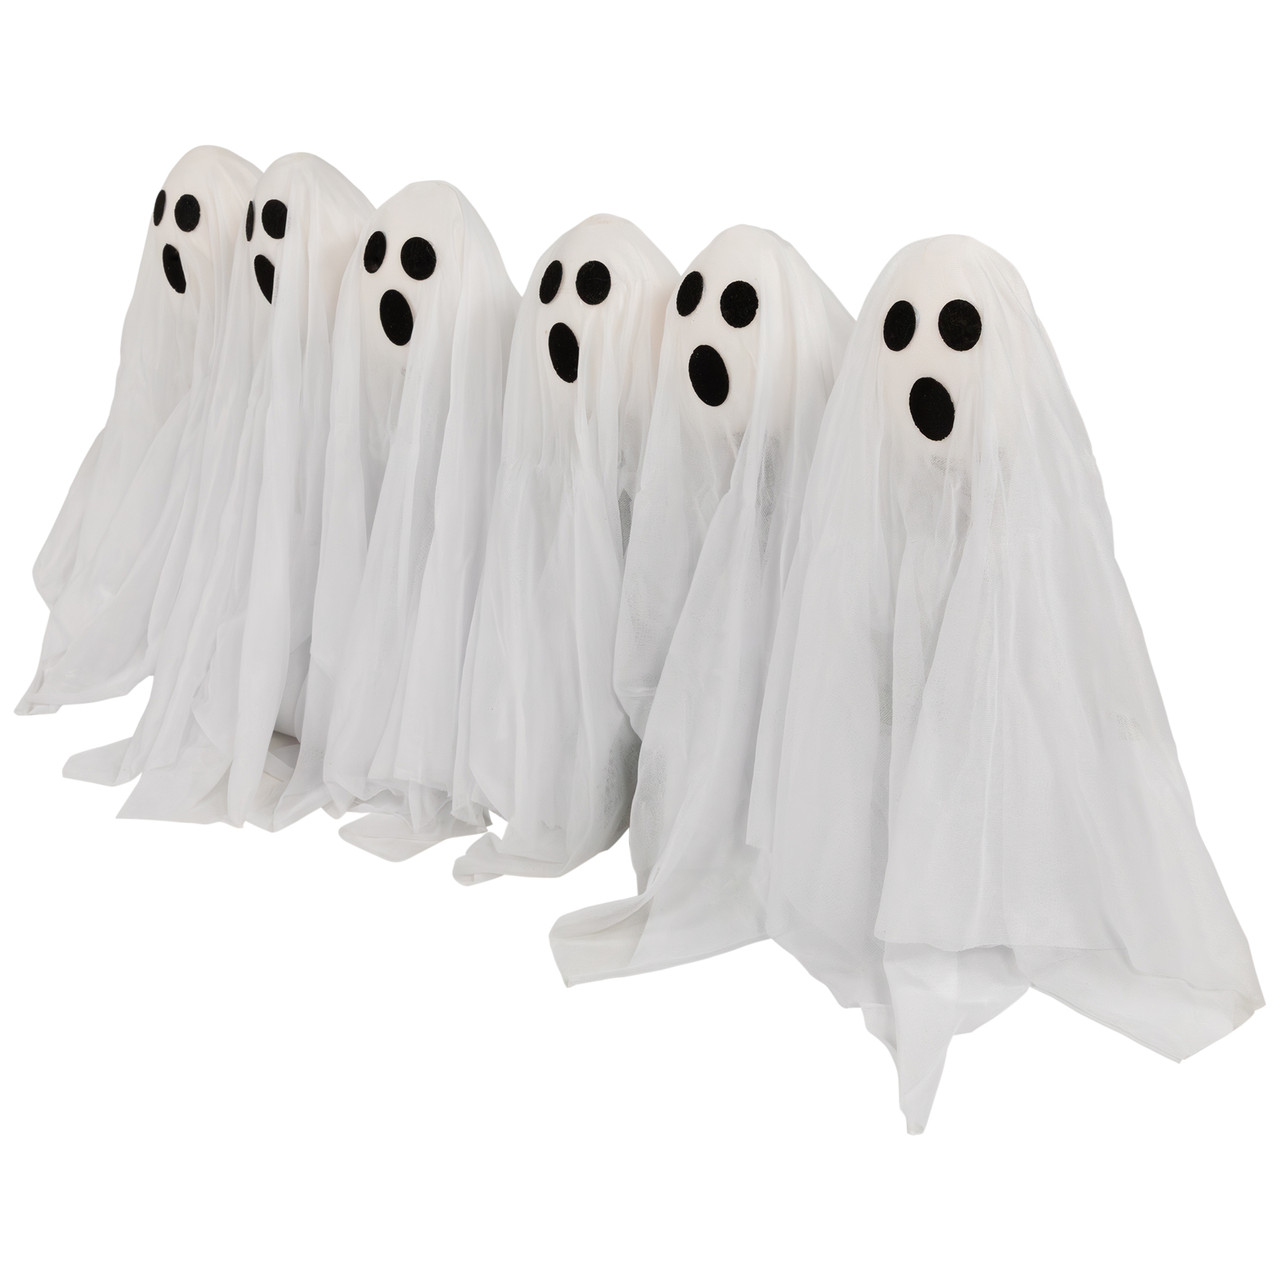 Set of 6 LED Lighted White Ghost Halloween Outdoor Pathway Markers 30 ...